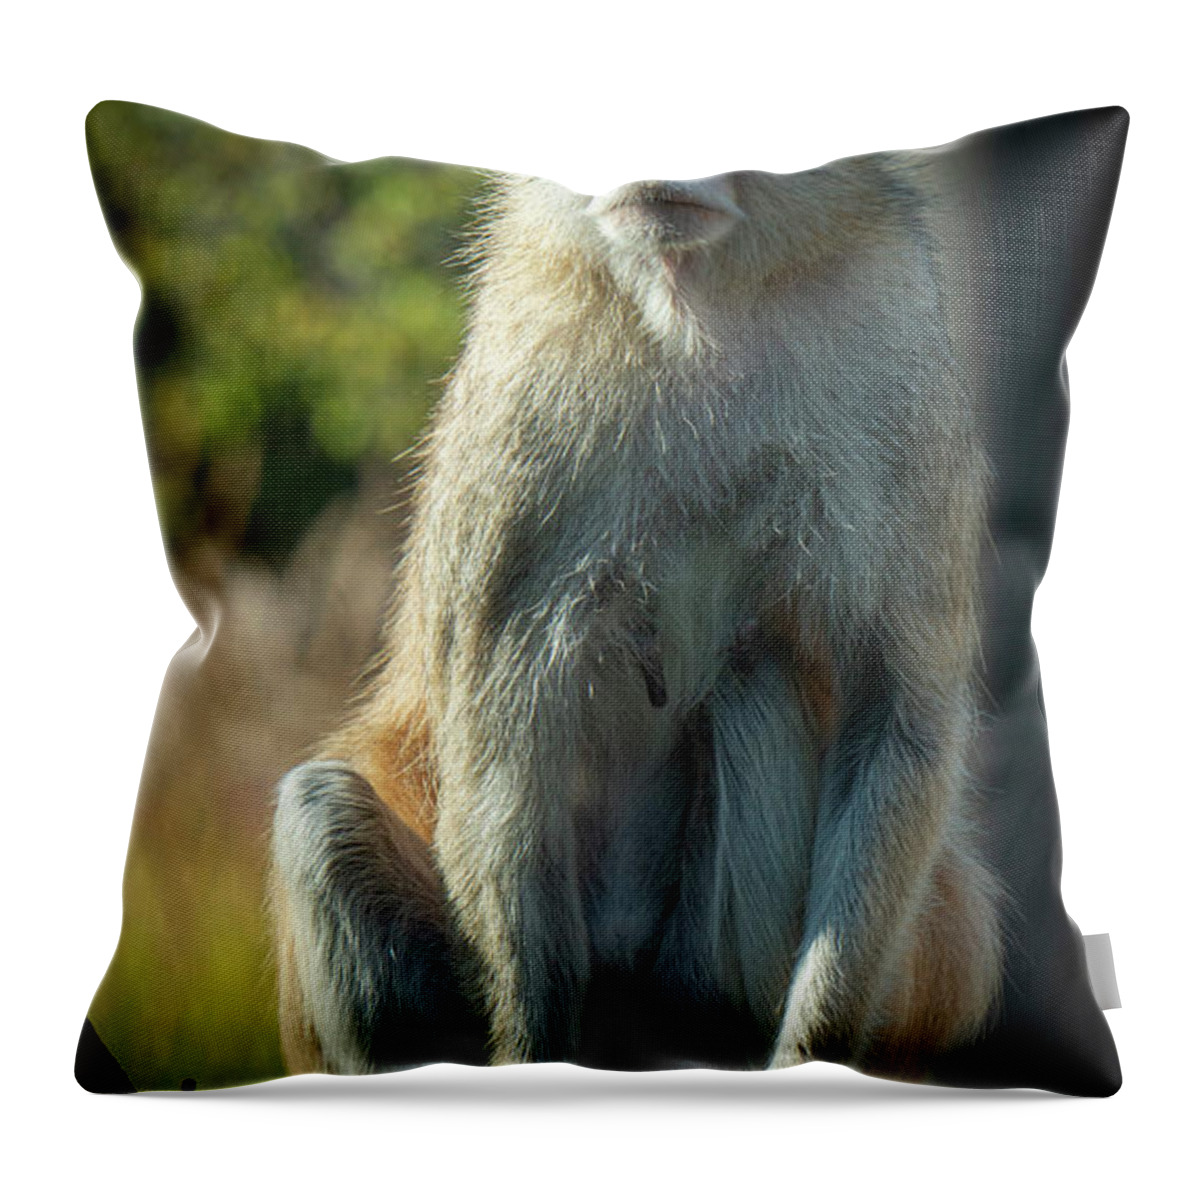 Monkey Throw Pillow featuring the photograph Monkey #2 by Jim Mathis